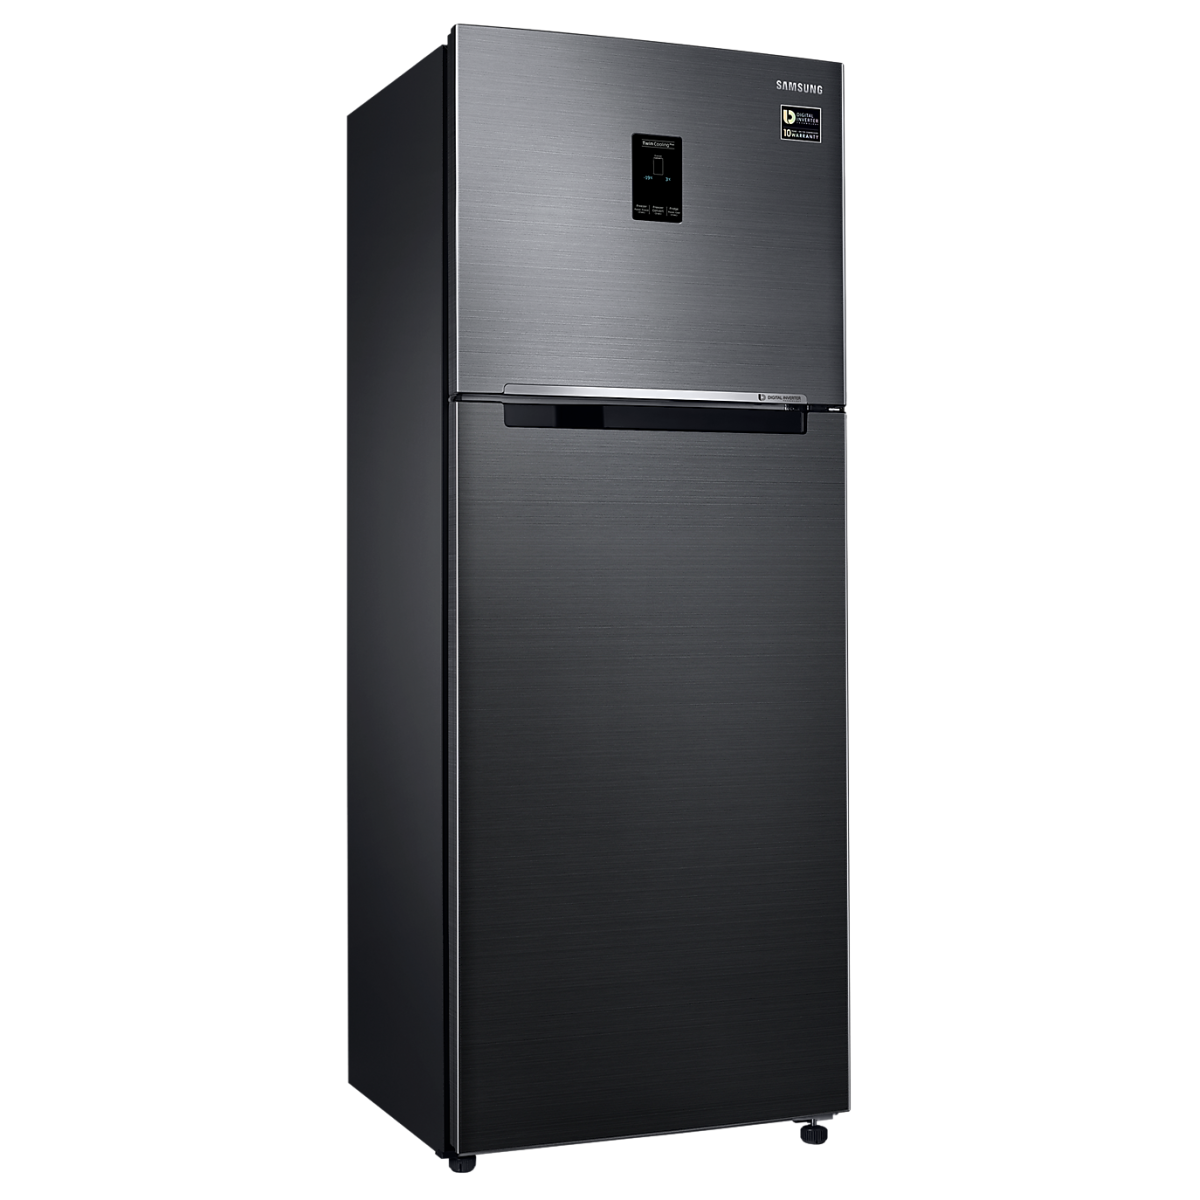 SAMSUNG 345 Liter Inverter Top Mount Refrigerator with 5 in 1 Convertible Mode RT37K5532BS/D3 Best Refrigerators of Year, Top-rated Refrigerators, Refrigerator Reviews, Refrigerator Comparison, Buying a Refrigerator Guide, Refrigerator Deals and Offers SAMSUNG 321 Liter Inverter Top Mount Refrigerator with 5 in 1 Convertible Mode RT34K5532BS/D3,Best Refrigerators of Year, Top-rated Refrigerators, Refrigerator Reviews, Refrigerator Comparison, Buying a Refrigerator Guide, Refrigerator Deals and Offers Best Refrigerators of Year, Top-rated Refrigerators, Refrigerator Reviews, Refrigerator Comparison, Buying a Refrigerator Guide, Refrigerator Deals and Offers, Best refrigerators in Chittagong, Best selling refrigerators in Chittagong, Best Electronics Store in Chittagong, Meem Electronics, MeemElectronics, Best Deal of Refrigerator, SAMSUNG Refrigerator price in Chittagong, SAMSUNG Refrigerator price in Bangladersh, 345 Liter Refrigerator, SAMSUNG Refrigerator, 01919382008, 01919382009, 019193820010 Best Refrigerators of Year, Top-rated Refrigerators, Refrigerator Reviews, Refrigerator Comparison, Buying a Refrigerator Guide, Refrigerator Deals and Offers, Best refrigerators in Chittagong, Best selling refrigerators in Chittagong, Best Electronics Store in Chittagong, Meem Electronics, MeemElectronics, Best Deal of Refrigerator, SAMSUNG Refrigerator price in Chittagong, SAMSUNG Refrigerator price in Bangladersh, 321 Liter Refrigerator, SAMSUNG Refrigerator, 01919382008, 01919382009, 019193820010